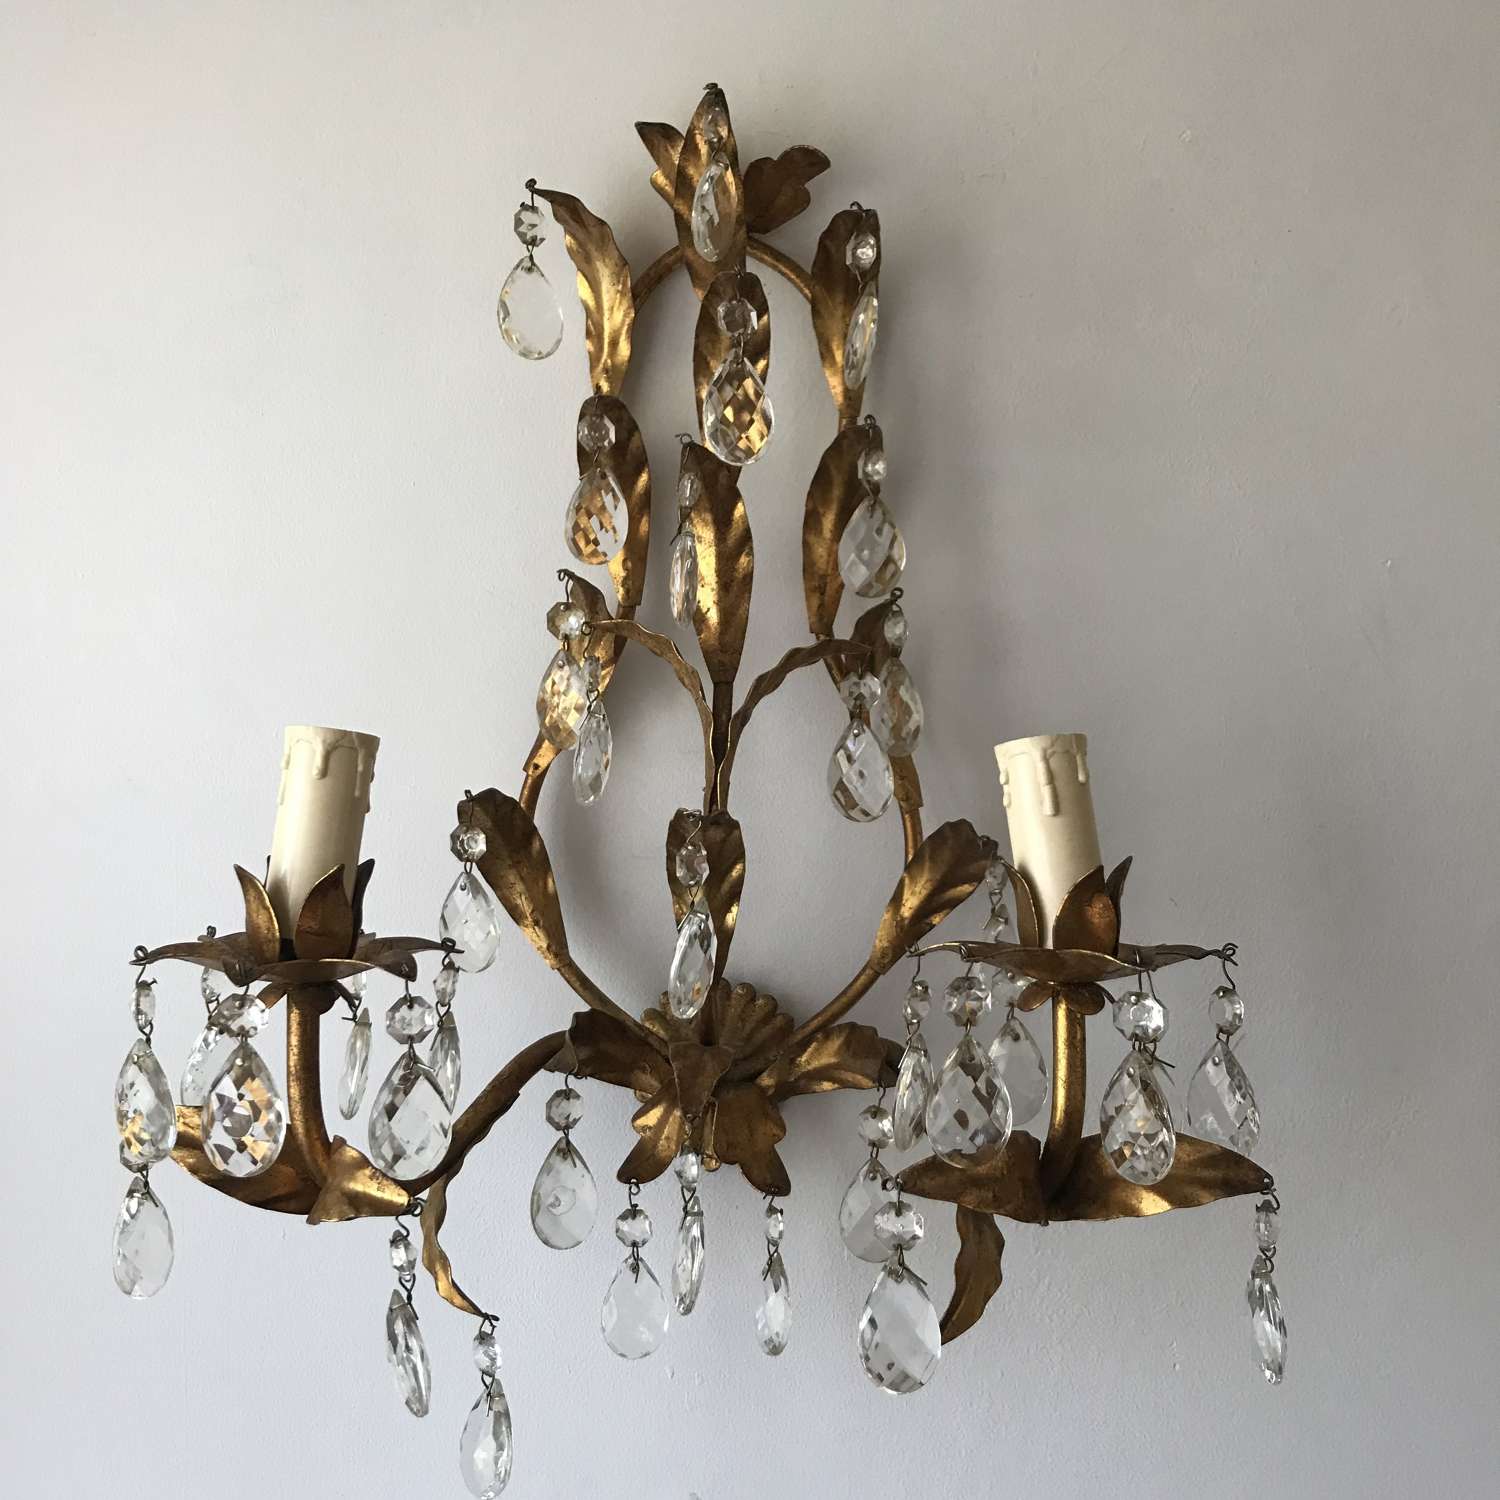 Vintage French gilt and crystal wall lamp.